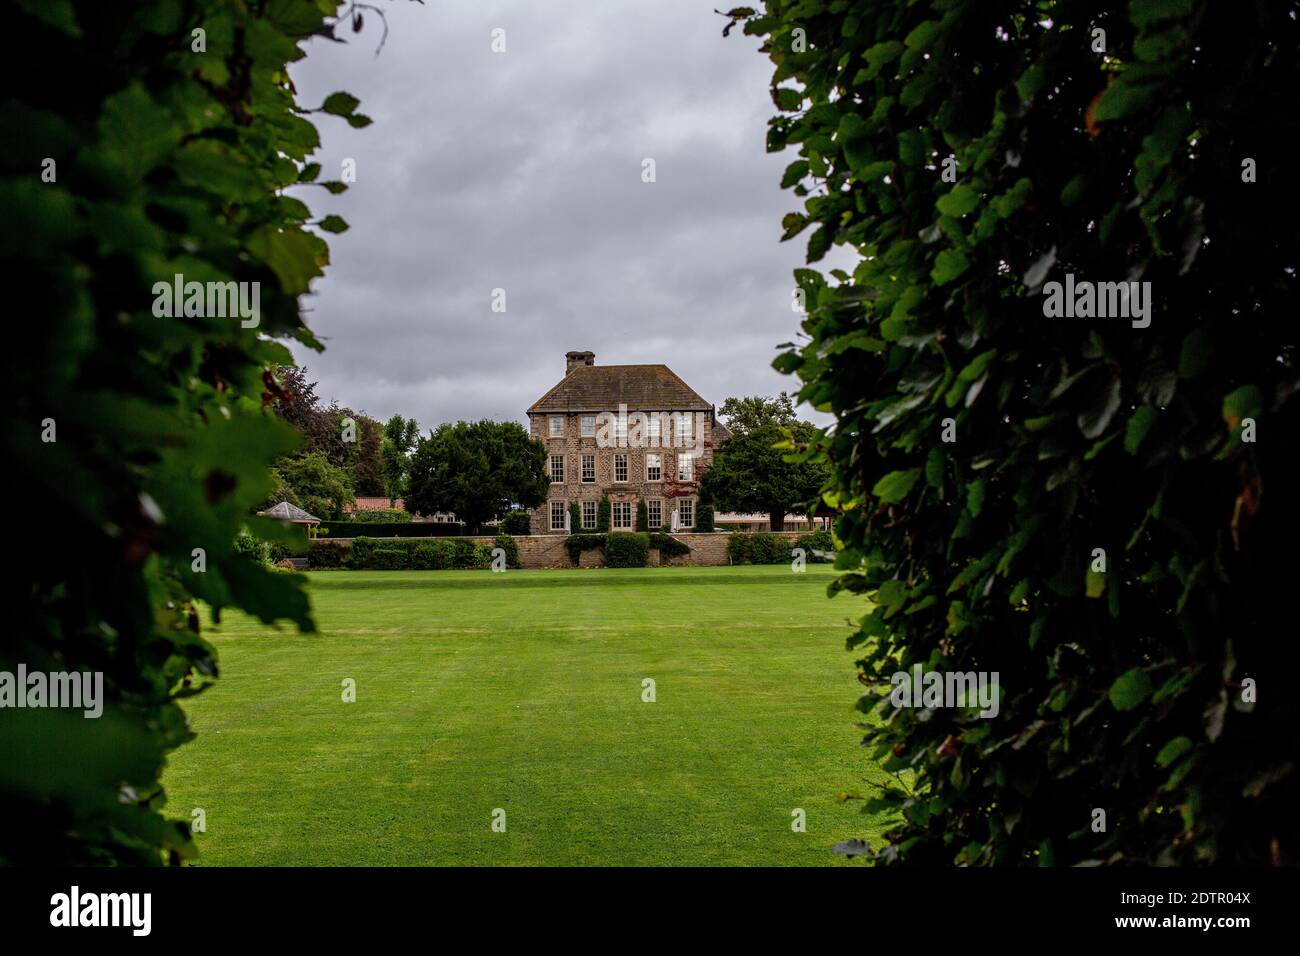 Hedlam Hall Country Hotel and Spa Darlington Foto Stock